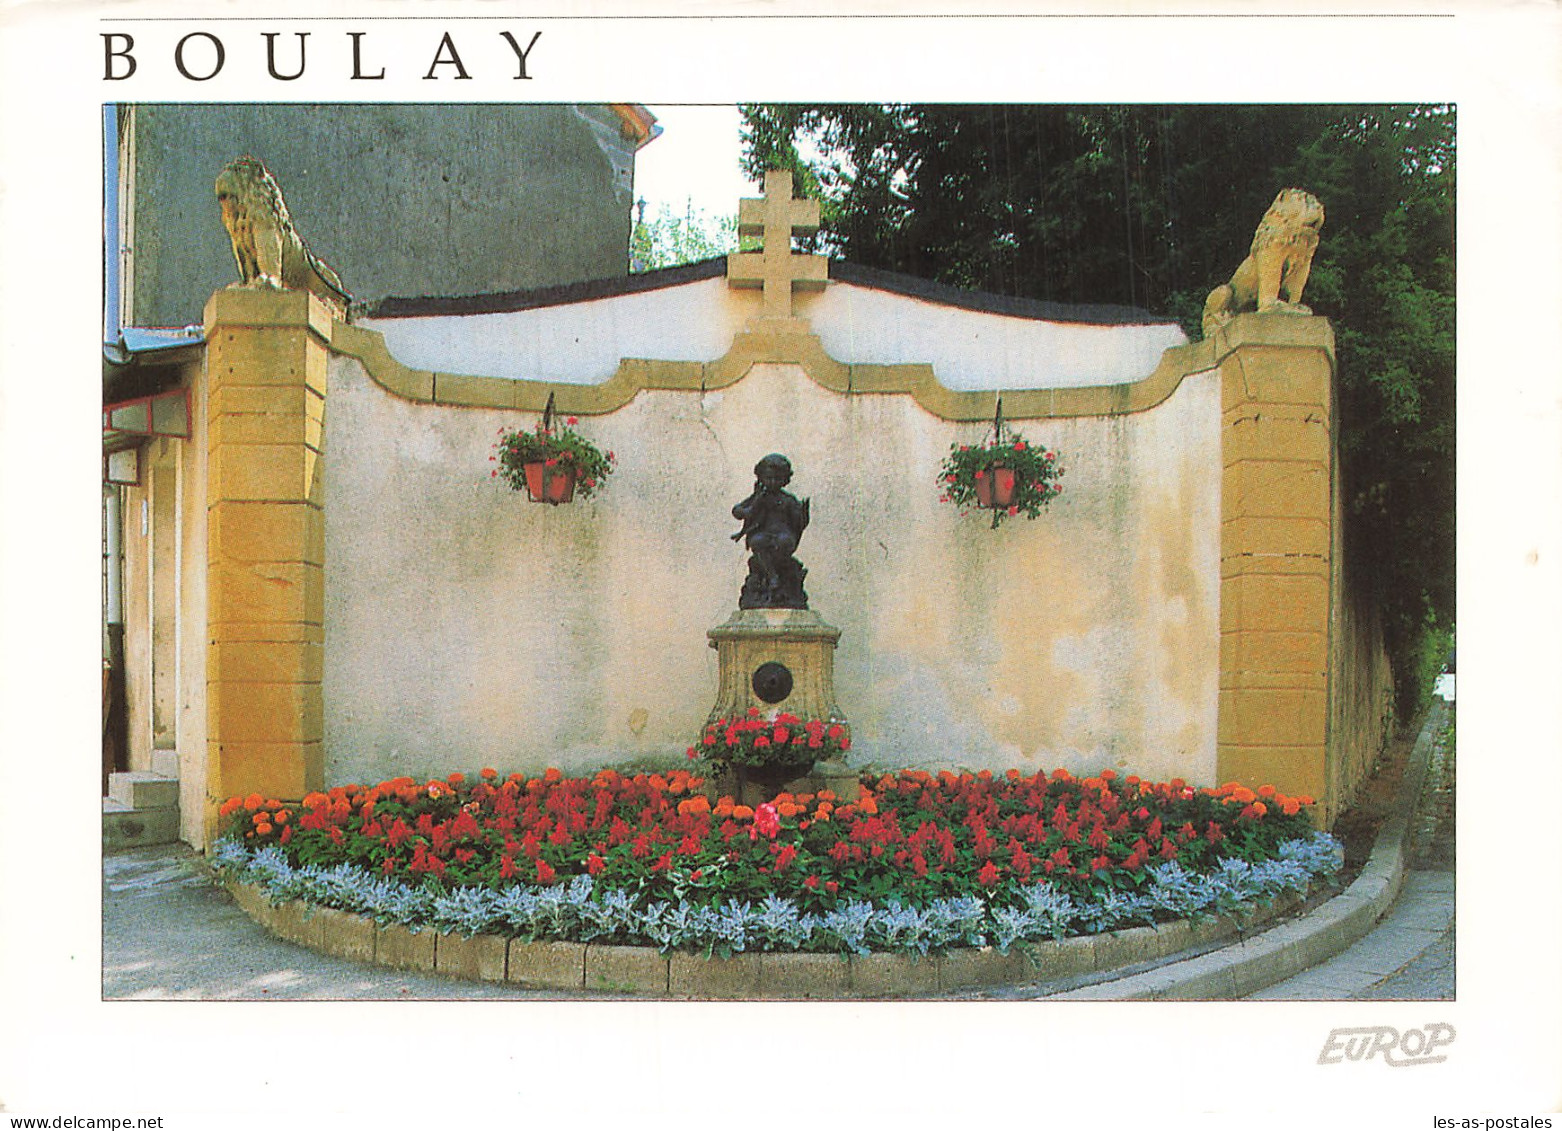 57 BOULAY FONTAINE AUX LIONS - Boulay Moselle